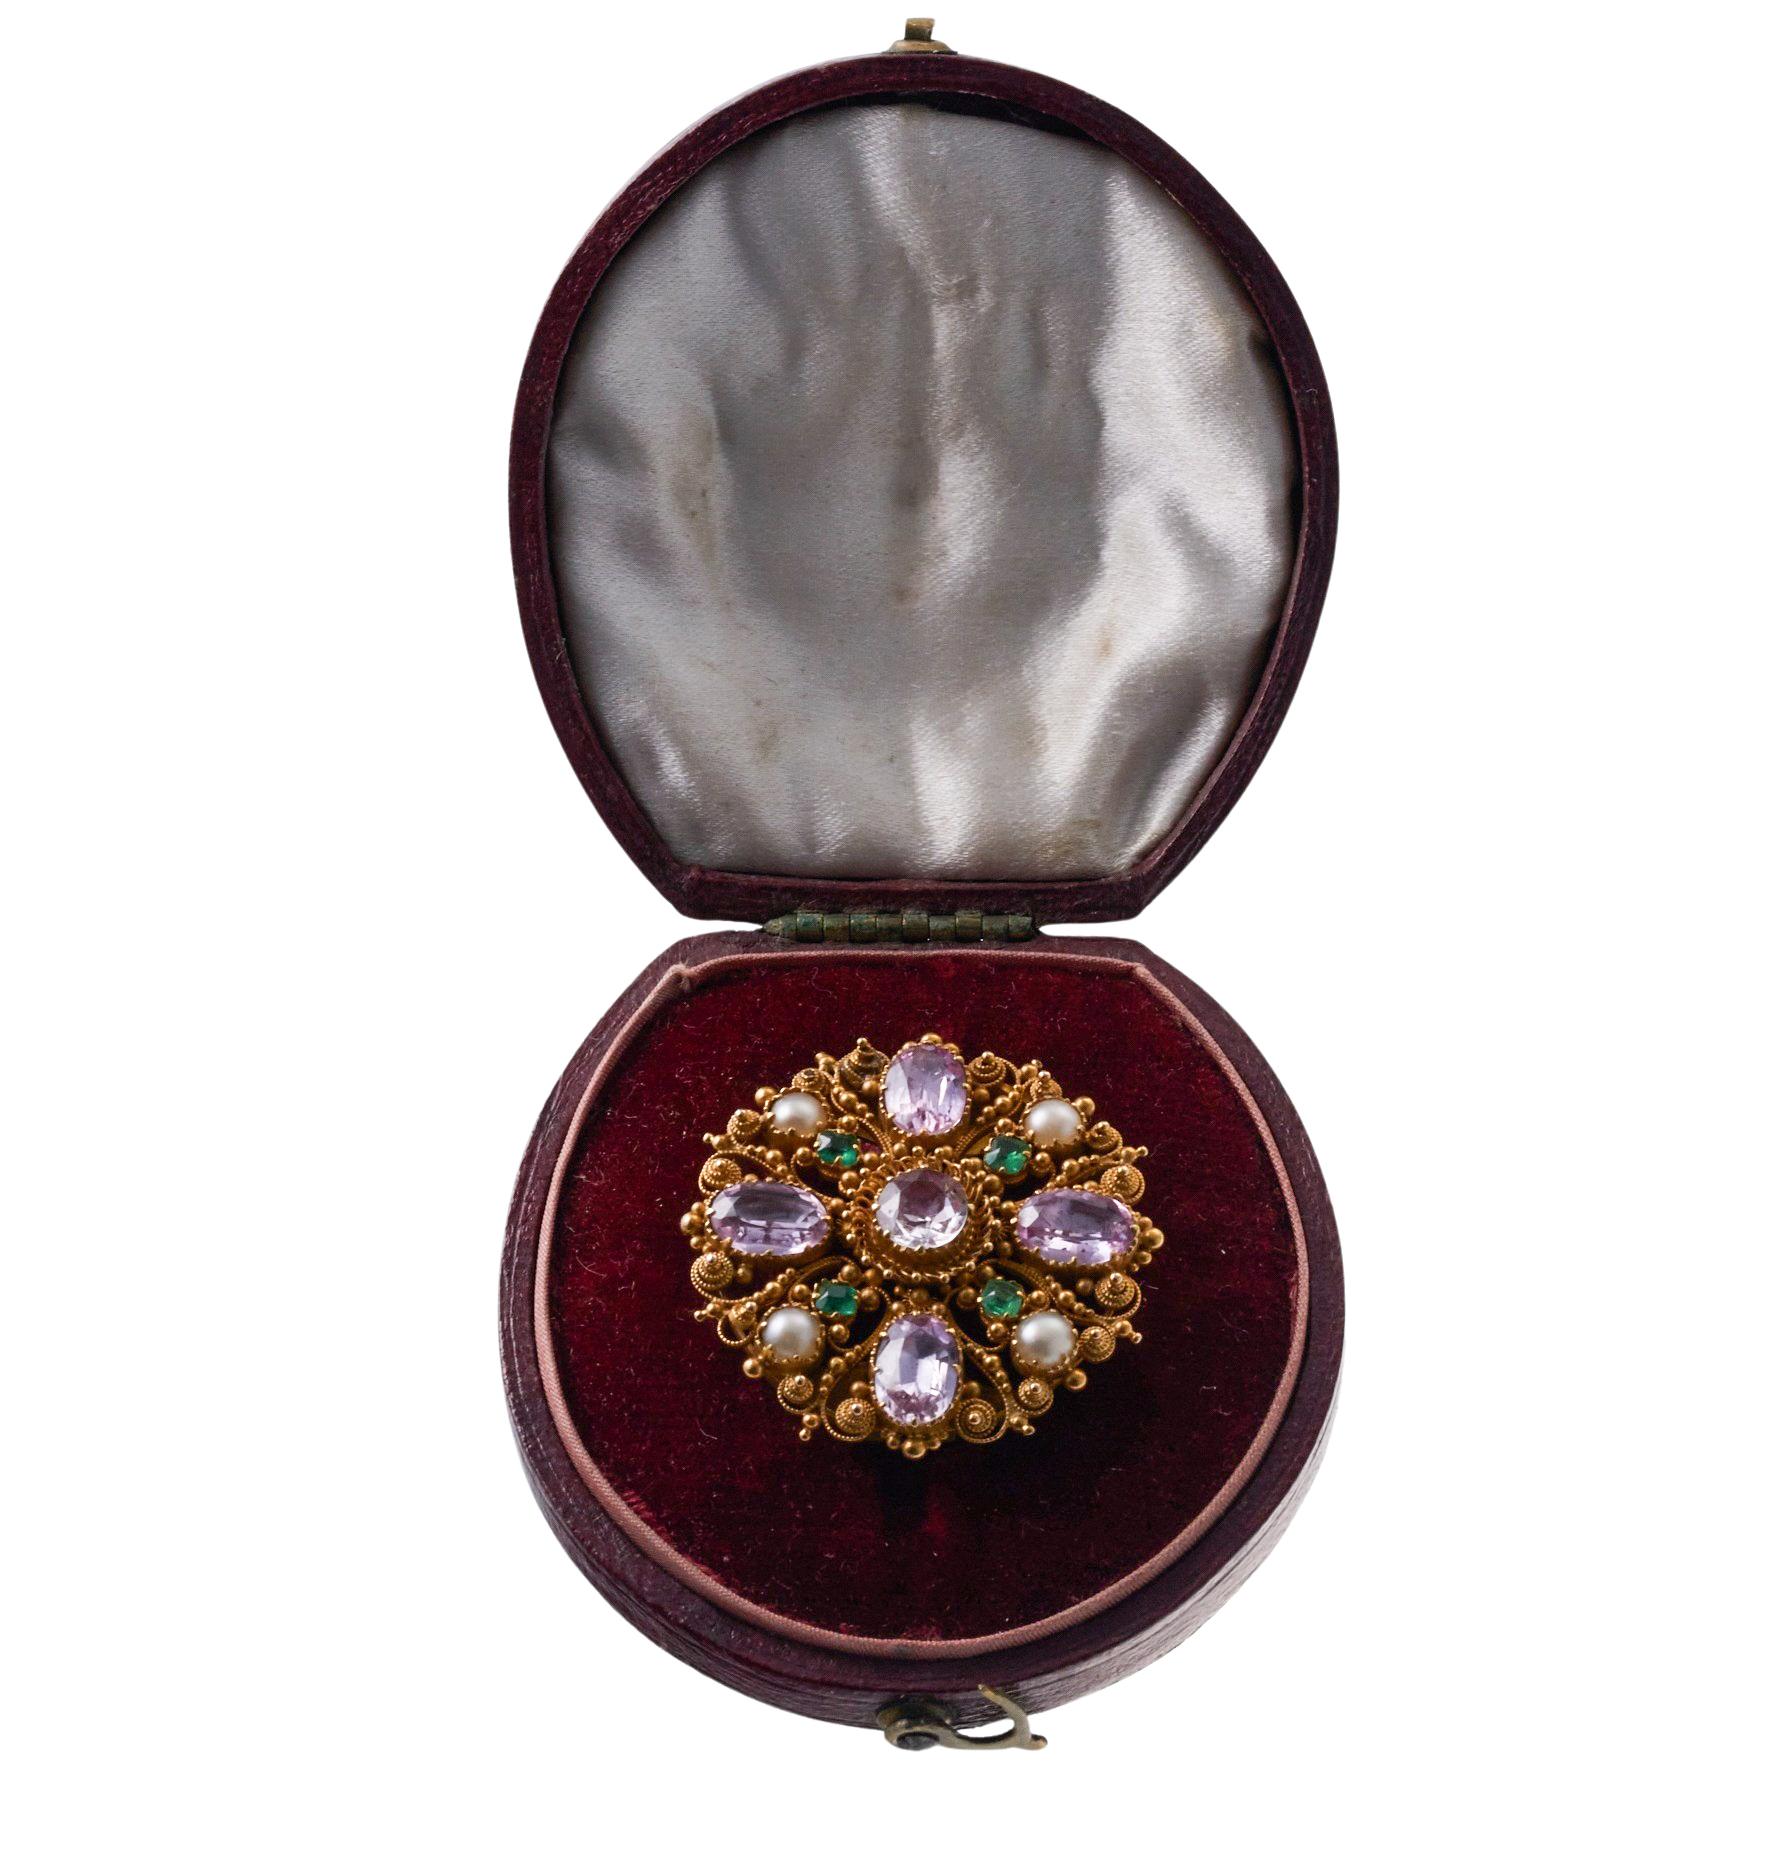 Antique 14k gold brooch, set with pearls, emeralds and precious pink topaz. Brooch comes in a fitter original box, measures 30mm in diameter.  Weight of the piece - 8.3 grams. 